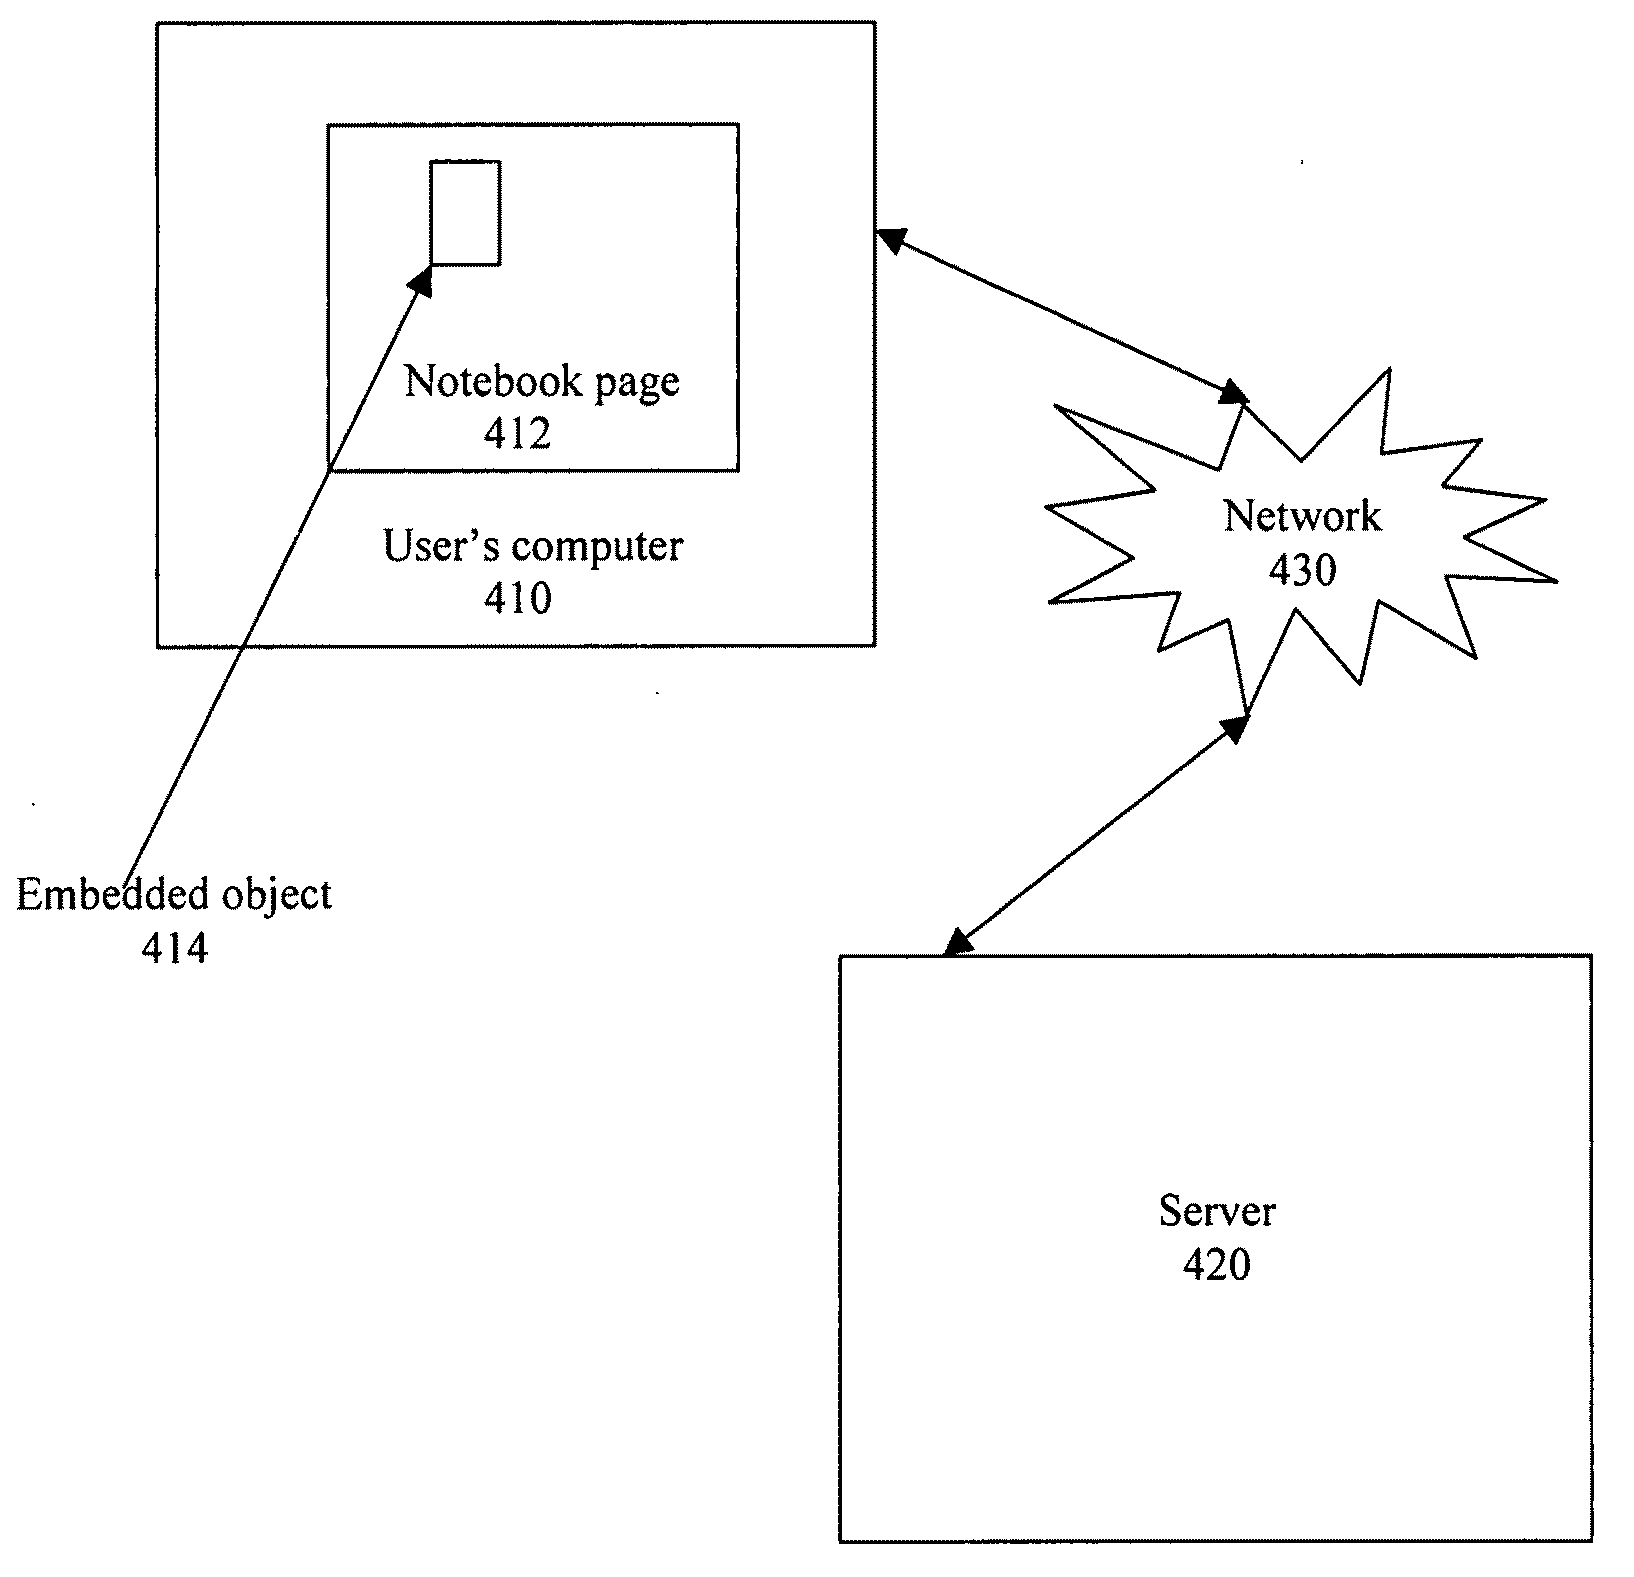 System and method for embedding, editing, saving, and restoring objects within a browser window